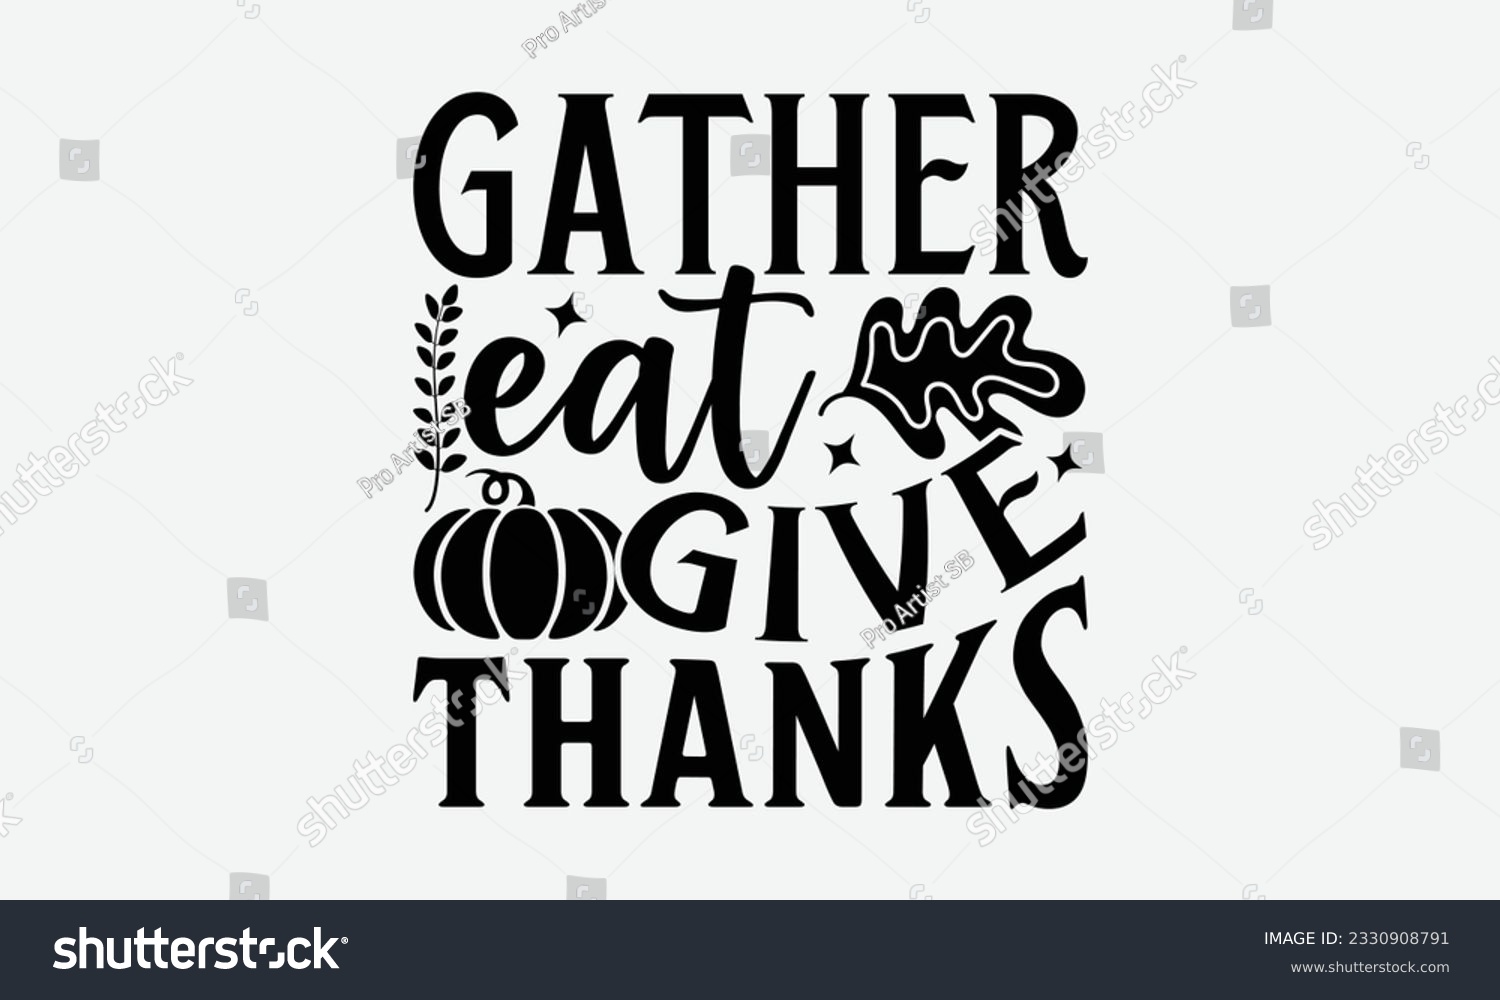 SVG of Gather Eat Give Thanks - Thanksgiving T-shirt Design Template, Happy Turkey Day SVG Quotes, Hand Drawn Lettering Phrase Isolated On White Background. svg